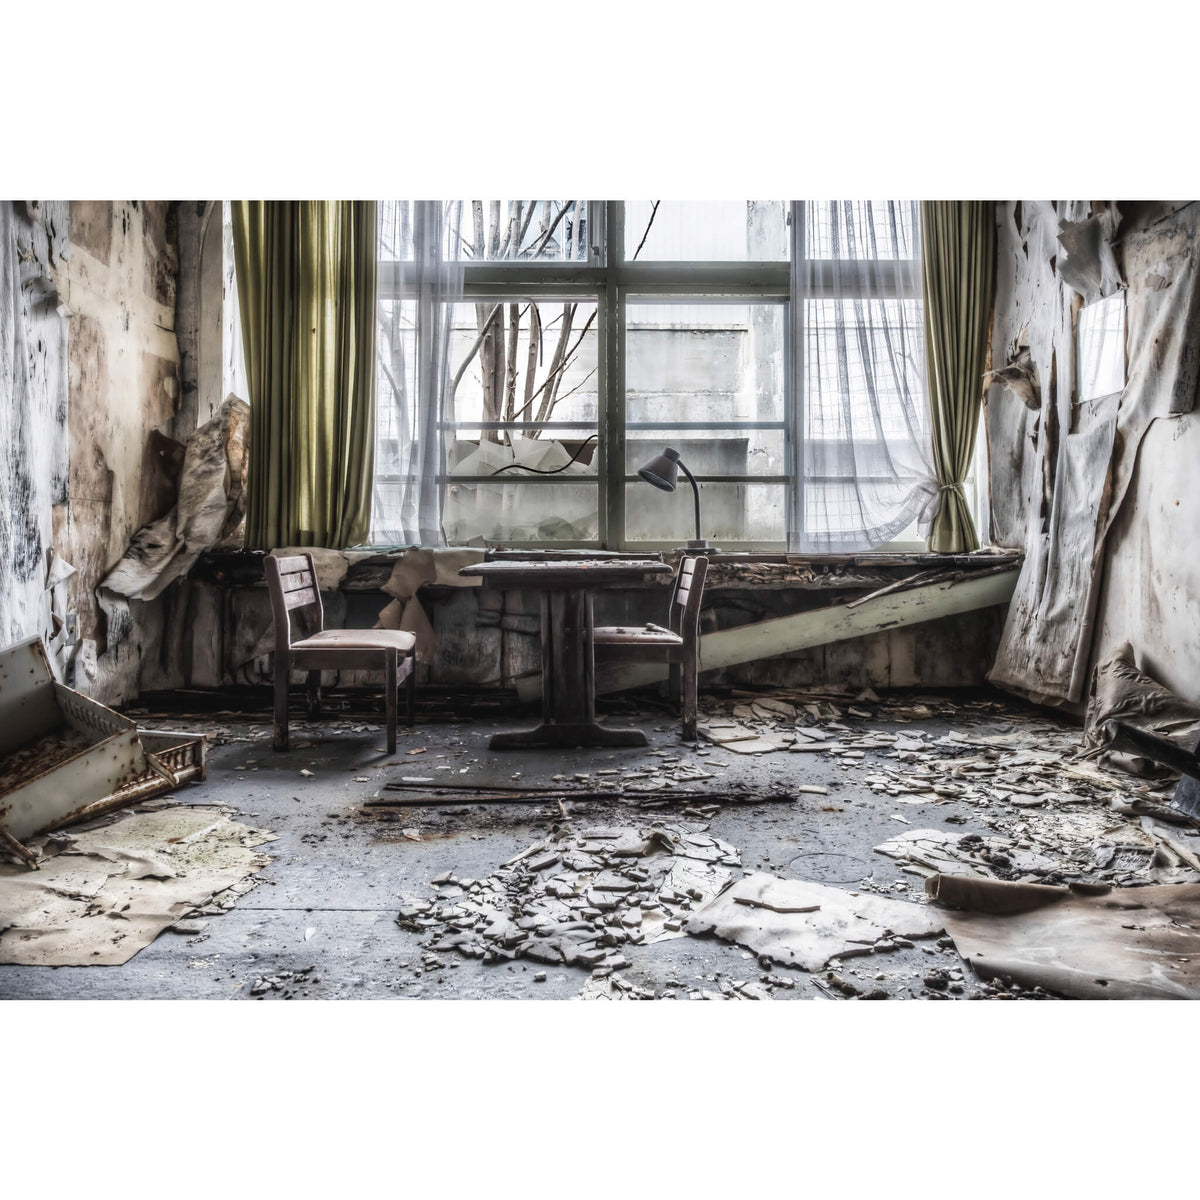 Decaying Tuition Room | Family School Fureai Fine Art Print - Lost Collective Shop